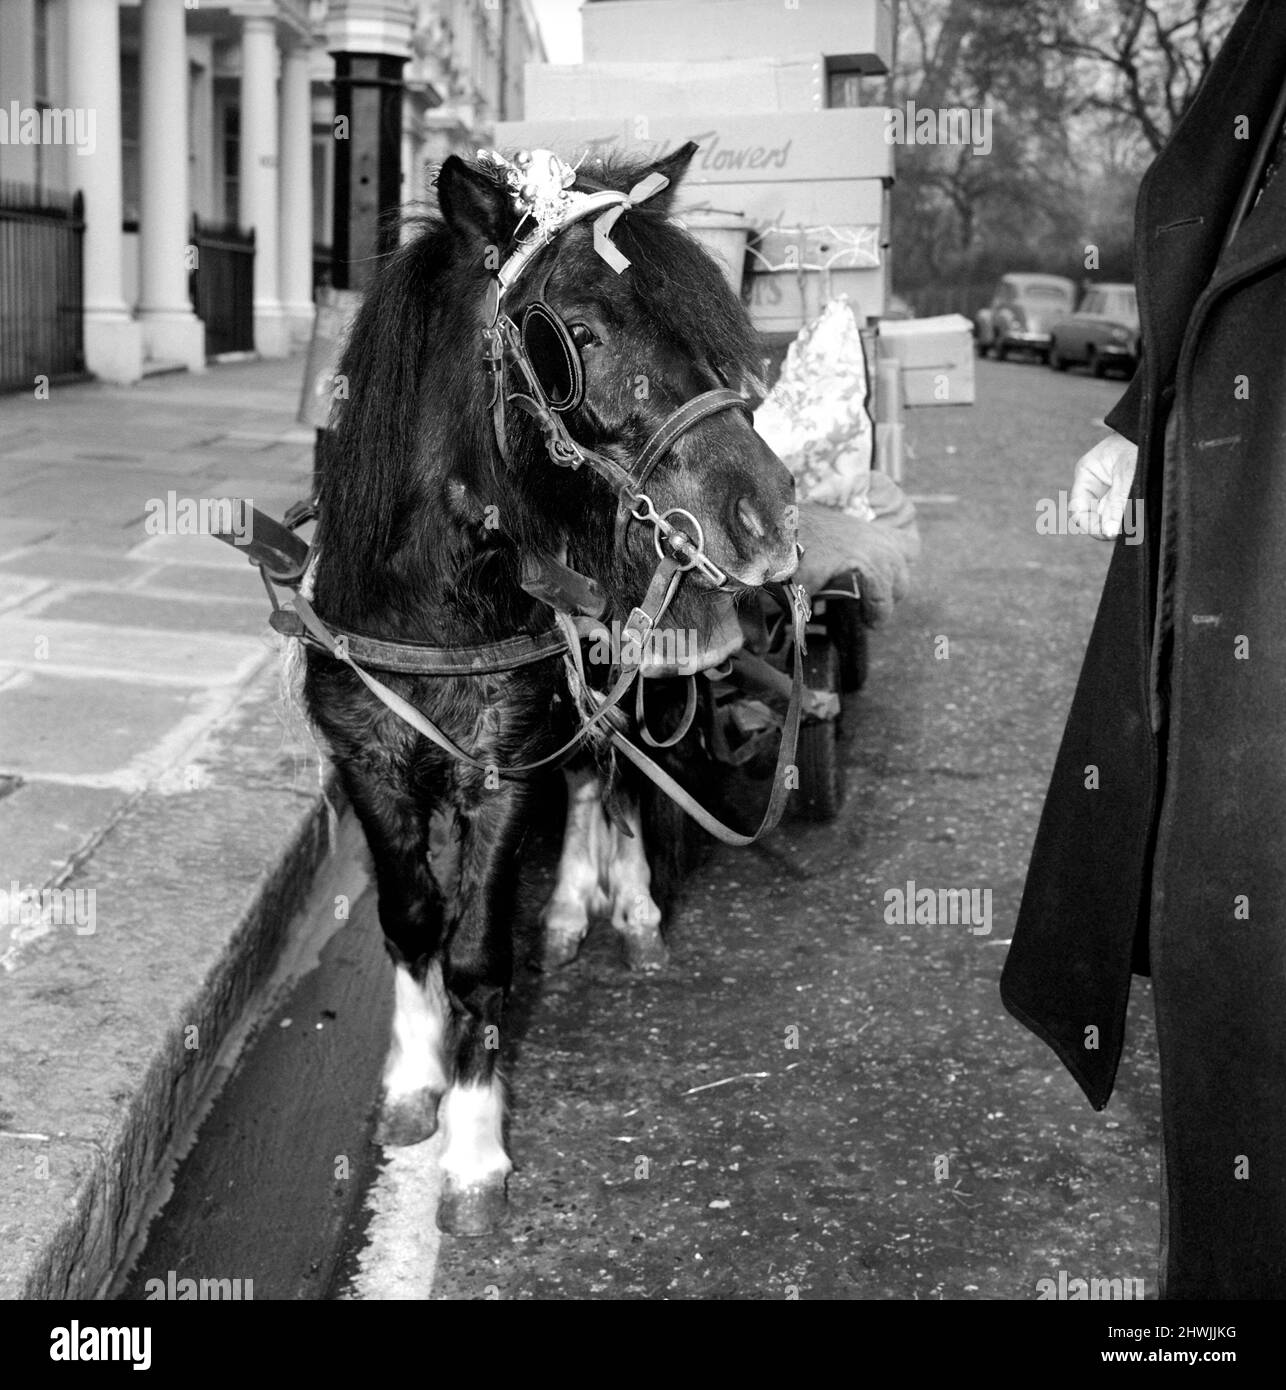 William Packman and Pony 'Twinkletoes'. William Packman, street flower trader of Tooting, out with 3-year-old Shetland pony 'Twinkletoes', in the Pimlico area. December 1972 72-11761-002 Stock Photo